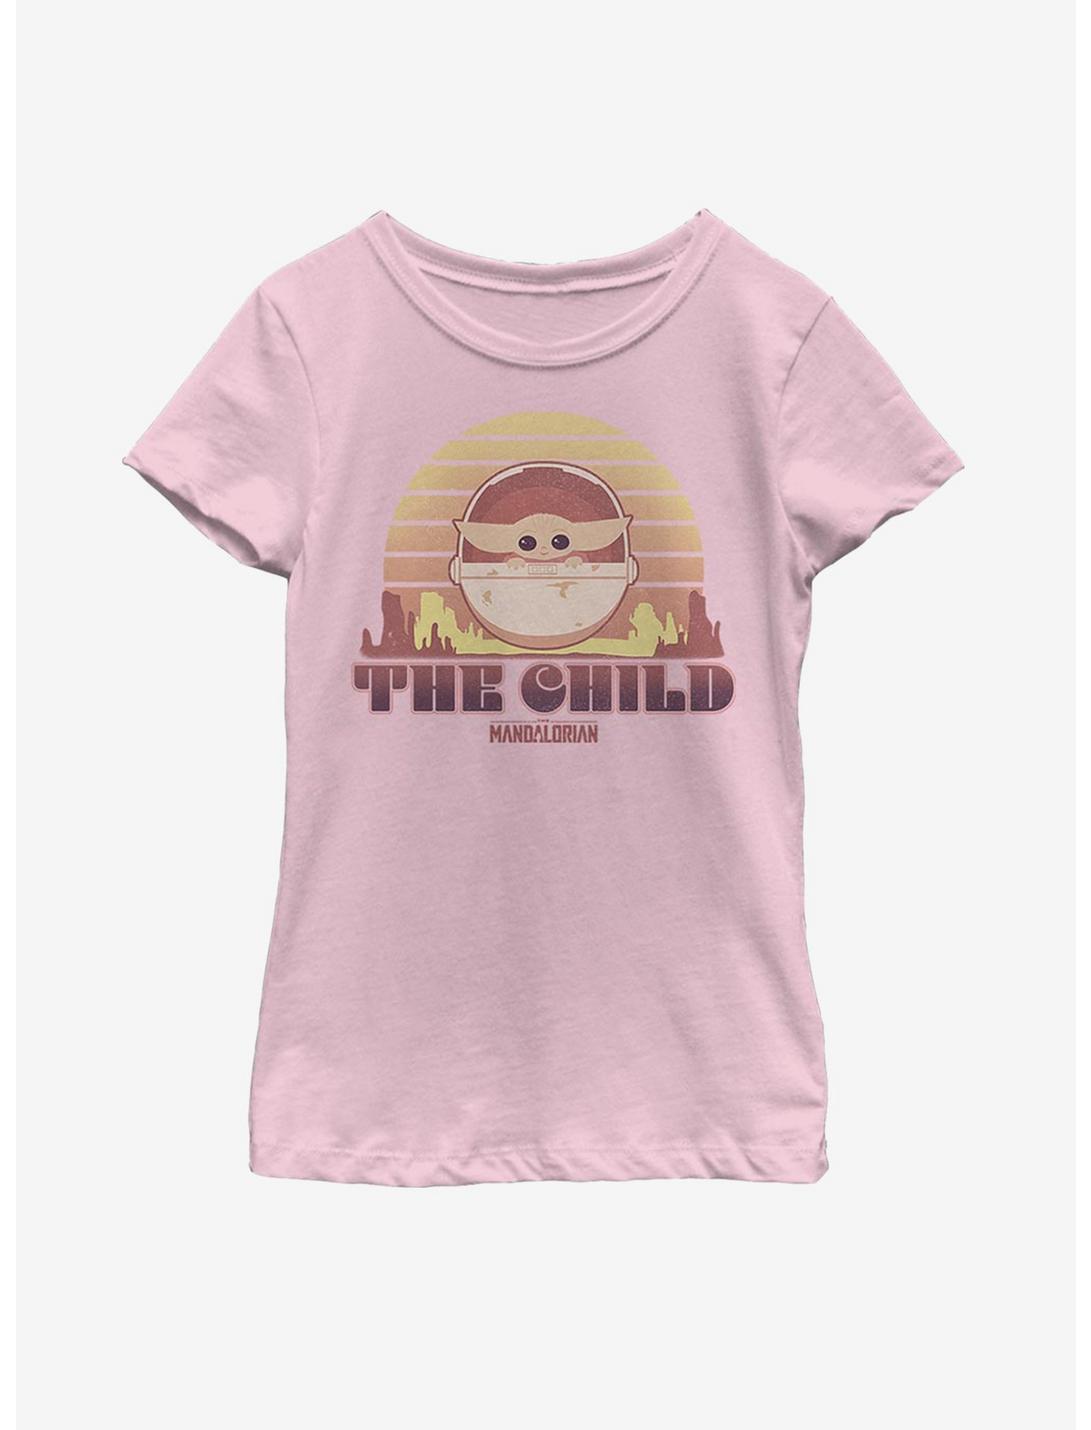 Star Wars The Mandalorian The Child Sunset Youth Girls T-Shirt, PINK, hi-res